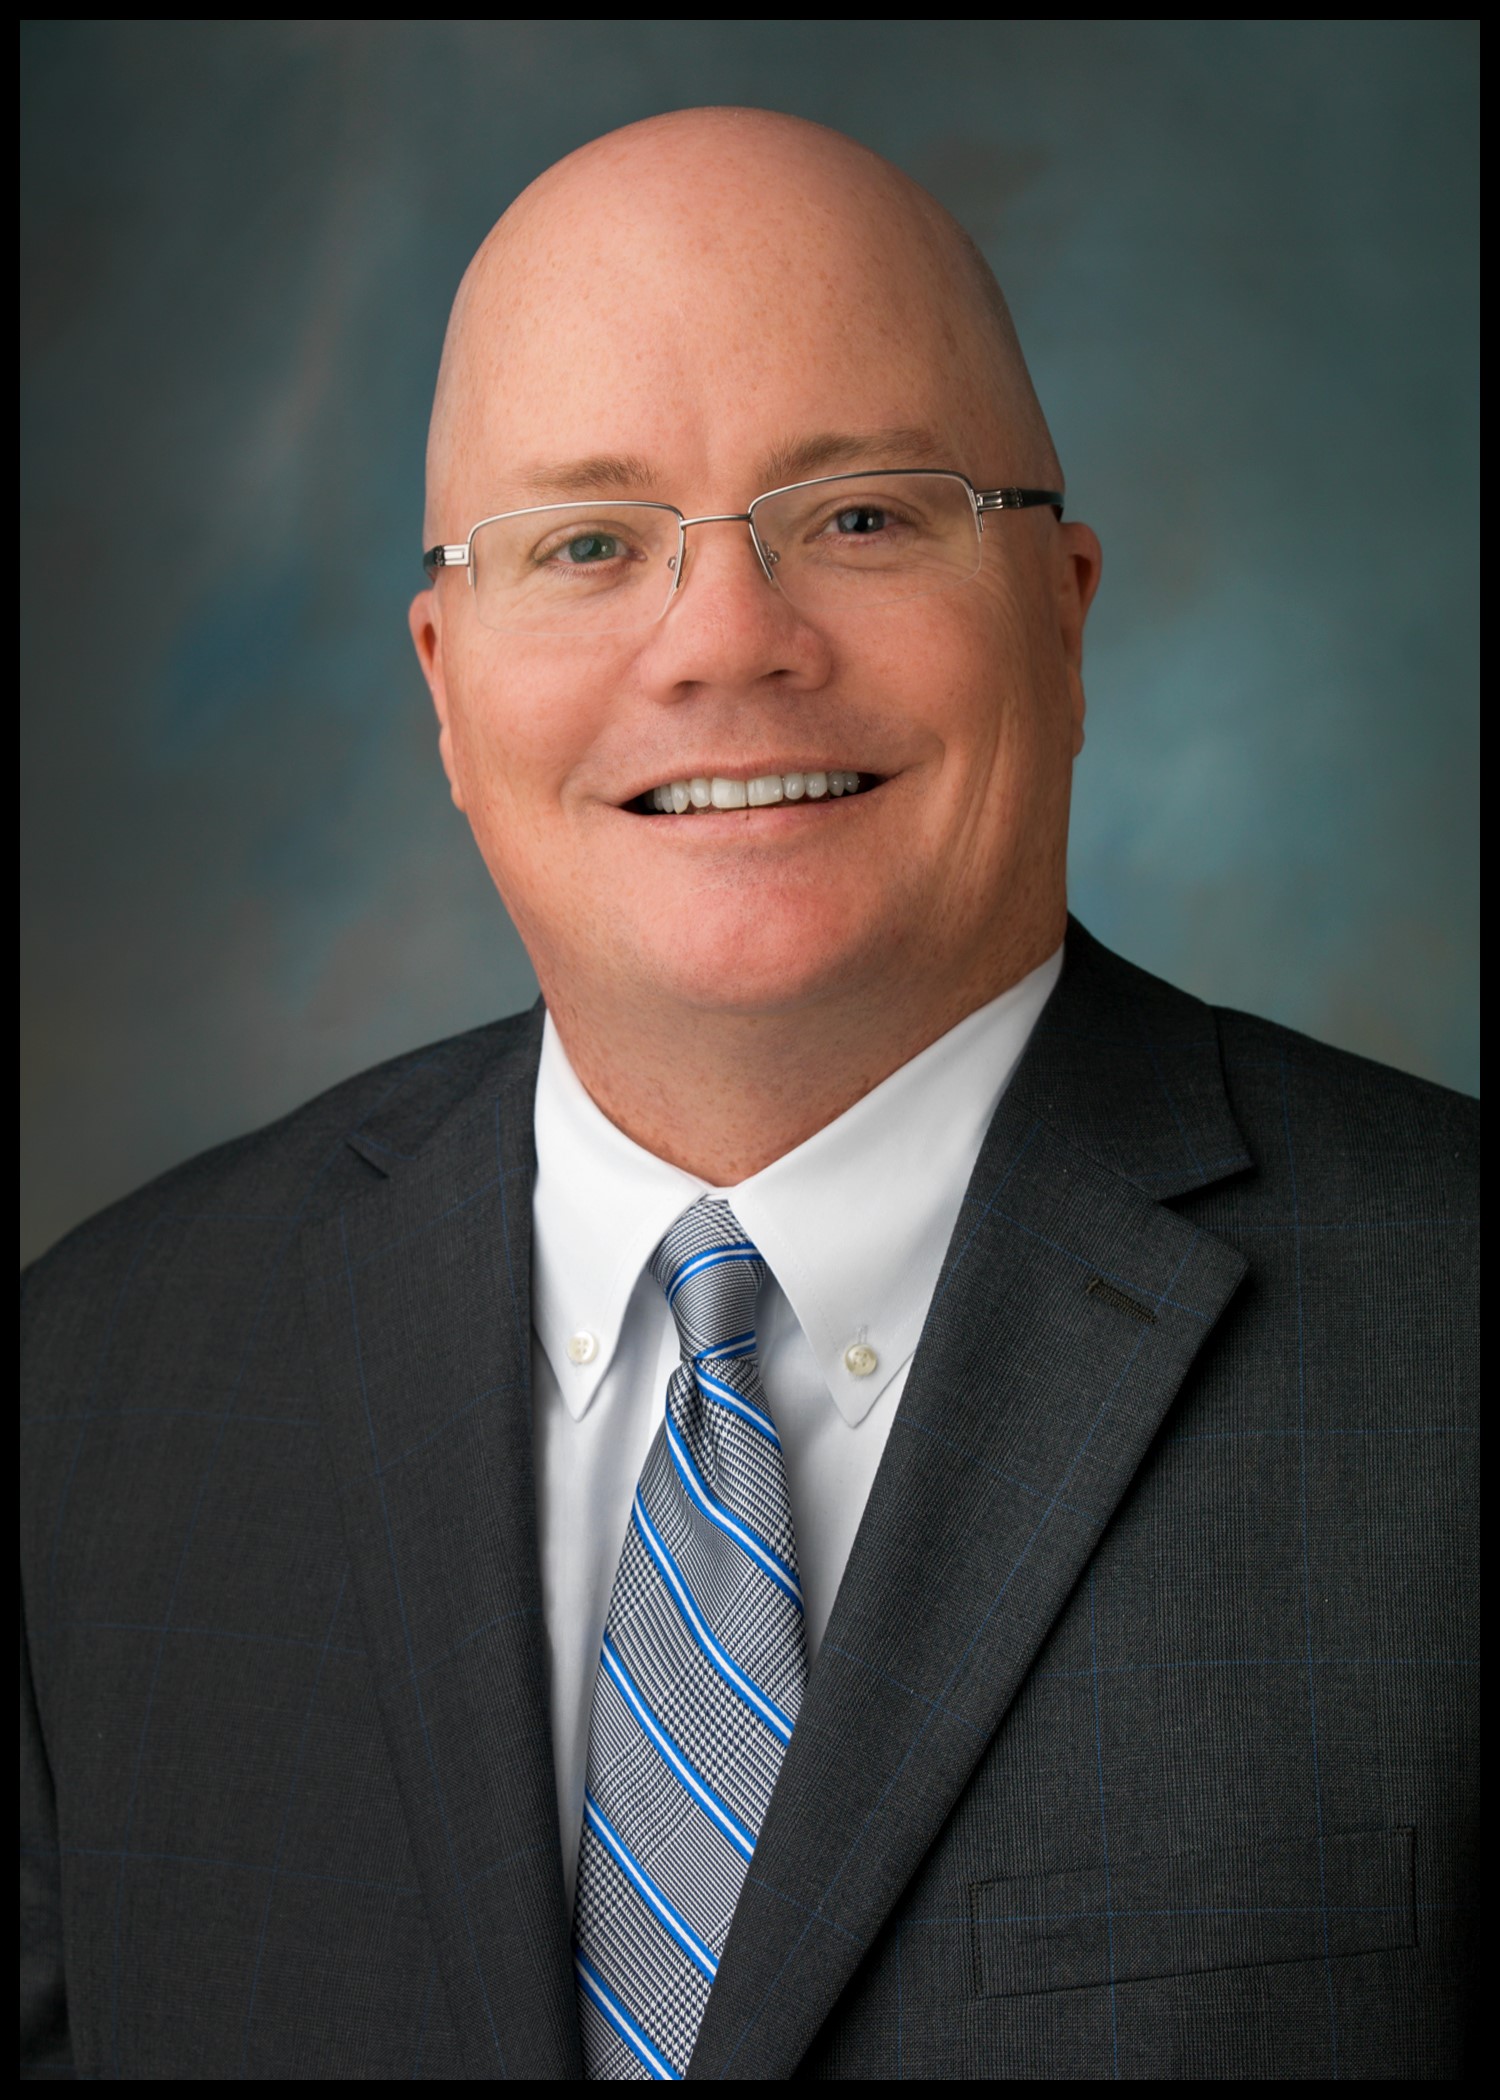 David E. Williams, Chief Logistics and Processing Operations Officer and Executive Vice President